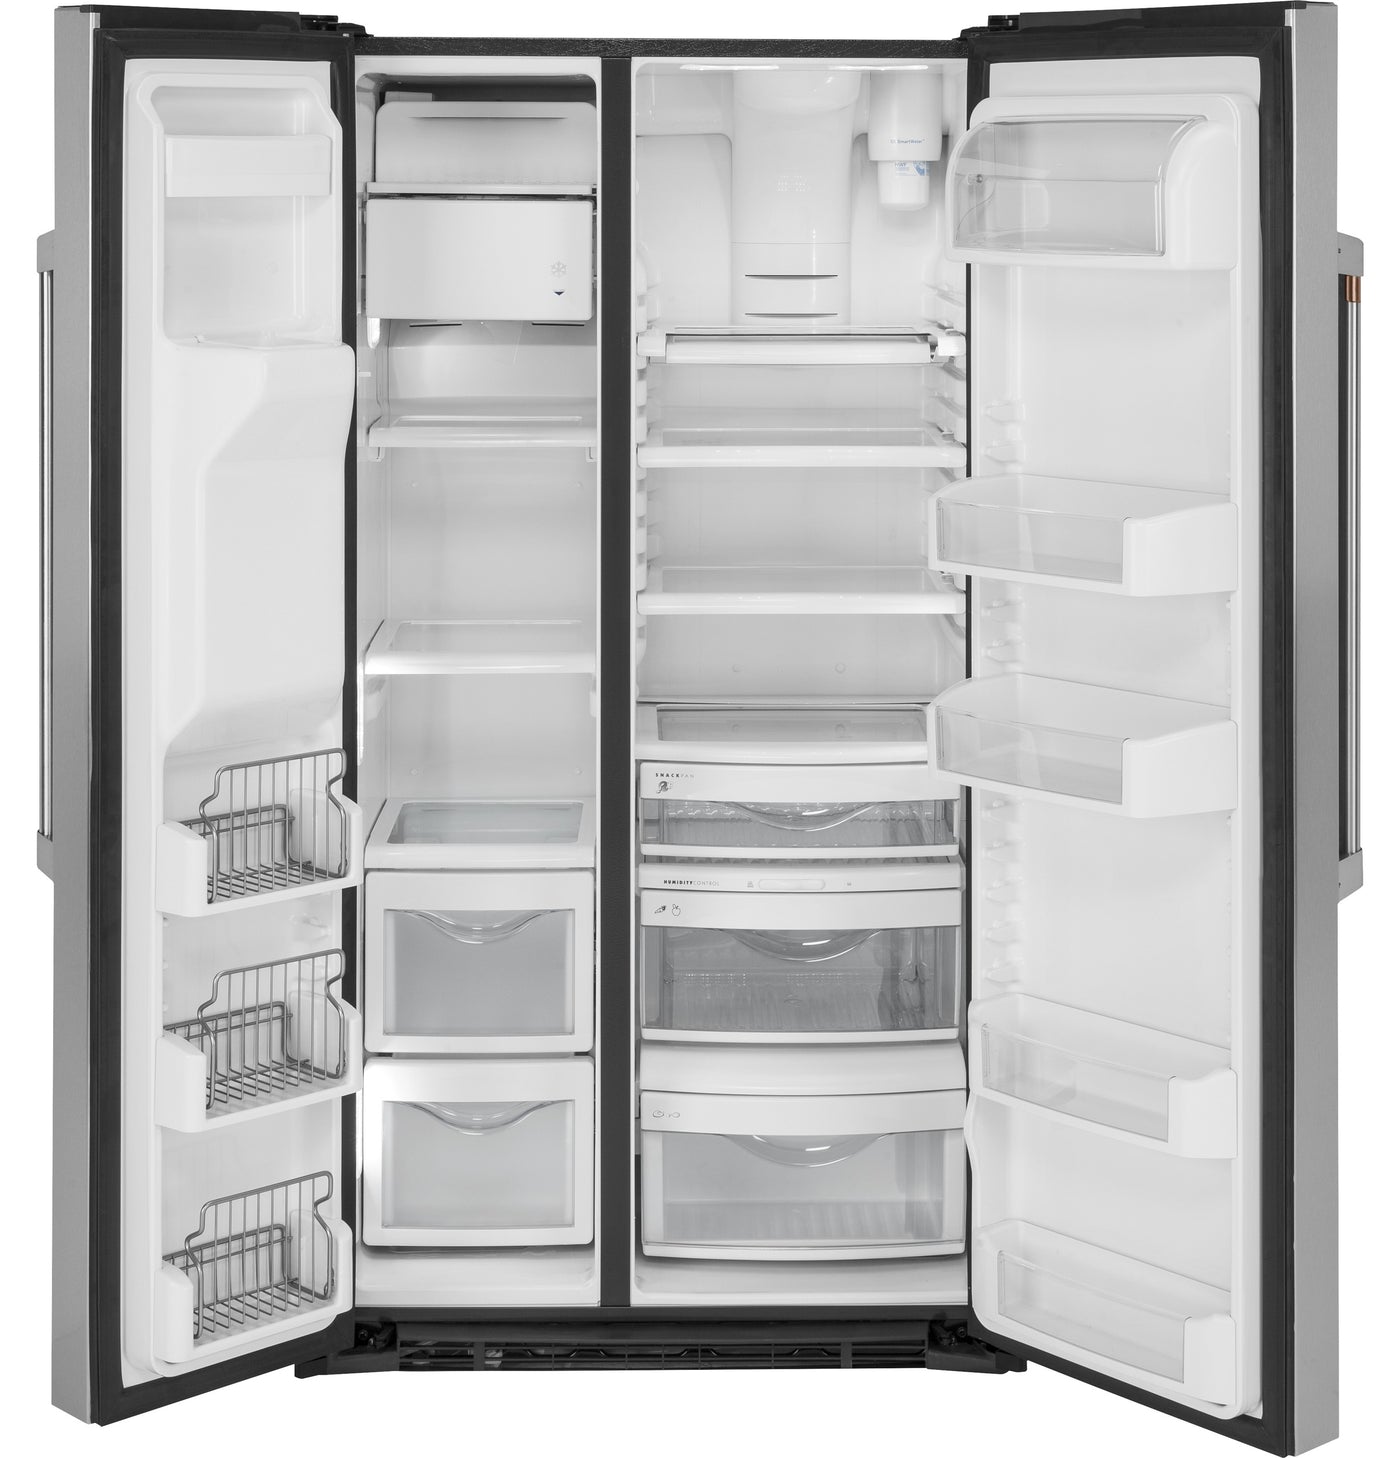 Café Stainless Steel 36" Counter-Depth Side-by-Side Refrigerator (21.9 Cu. Ft.) - CZS22MP2NS1